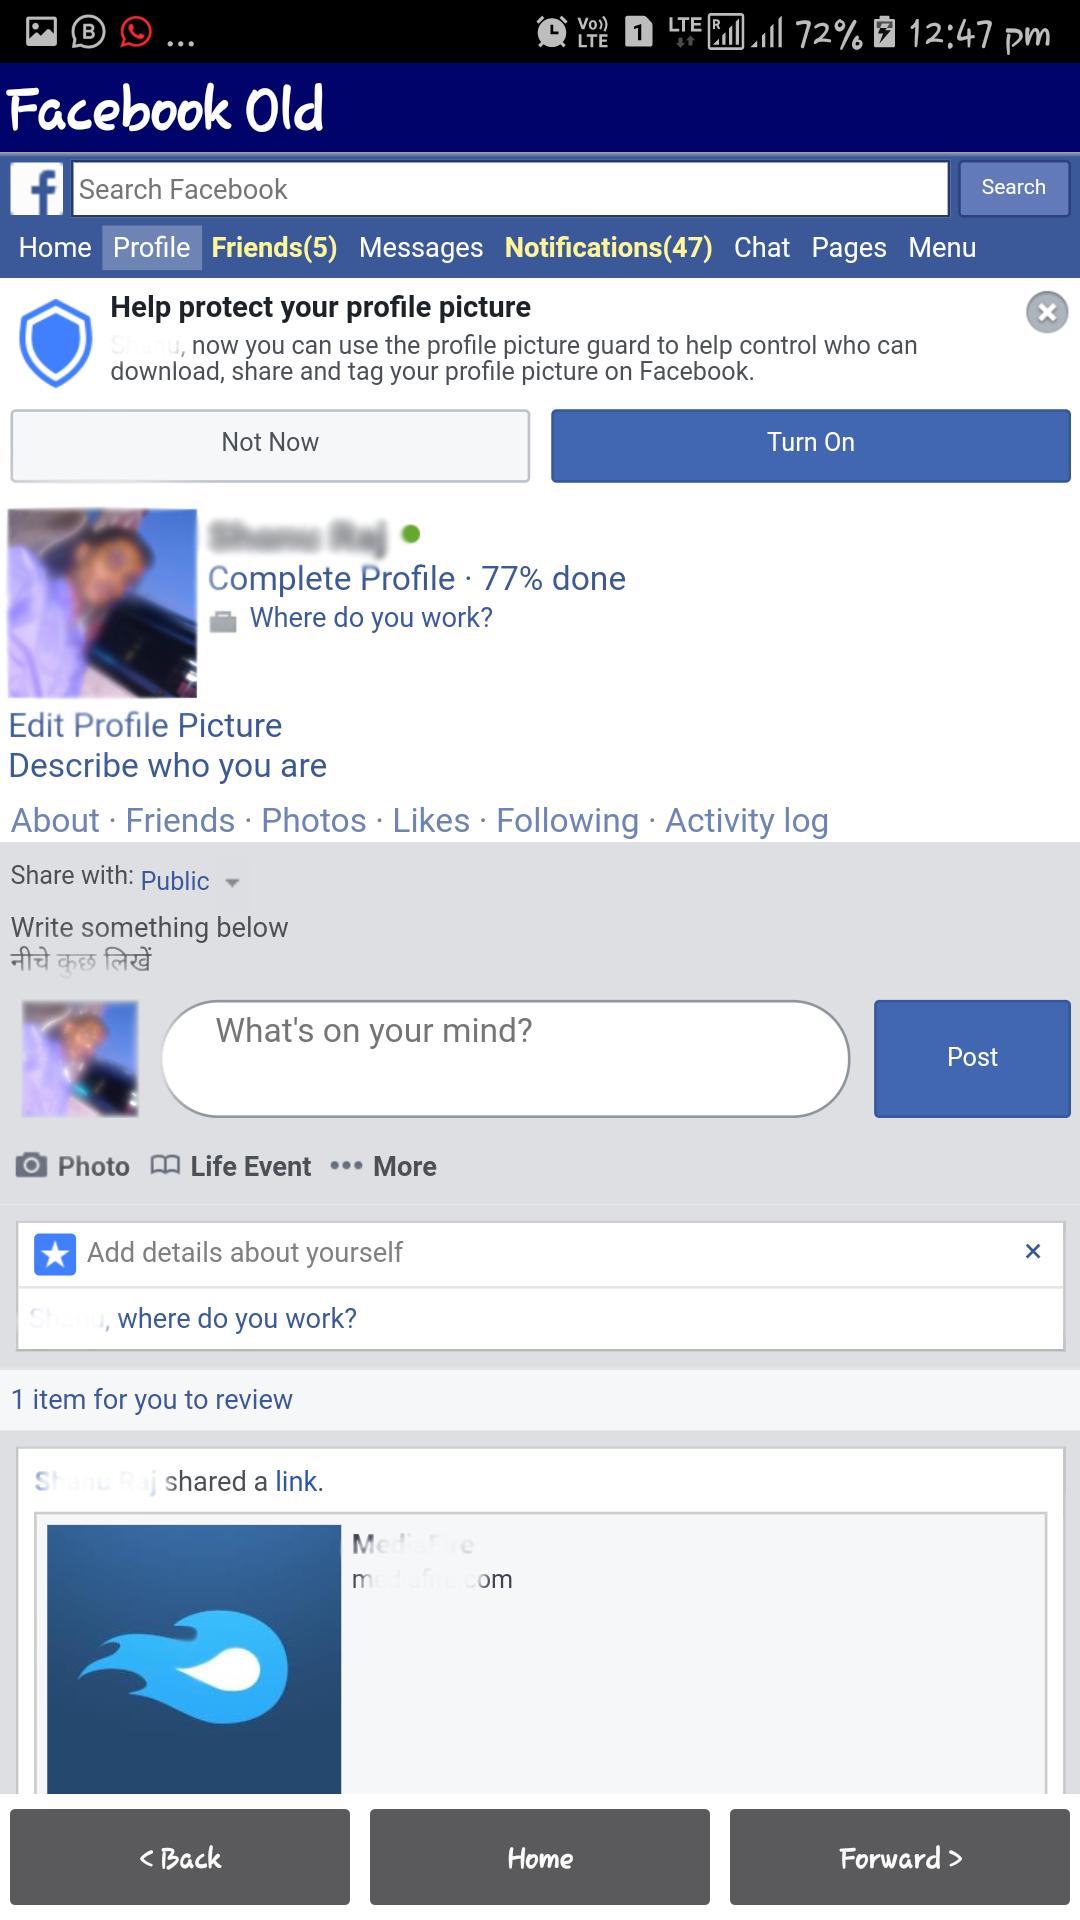 Facebook Old View Lite Version For Android Apk Download